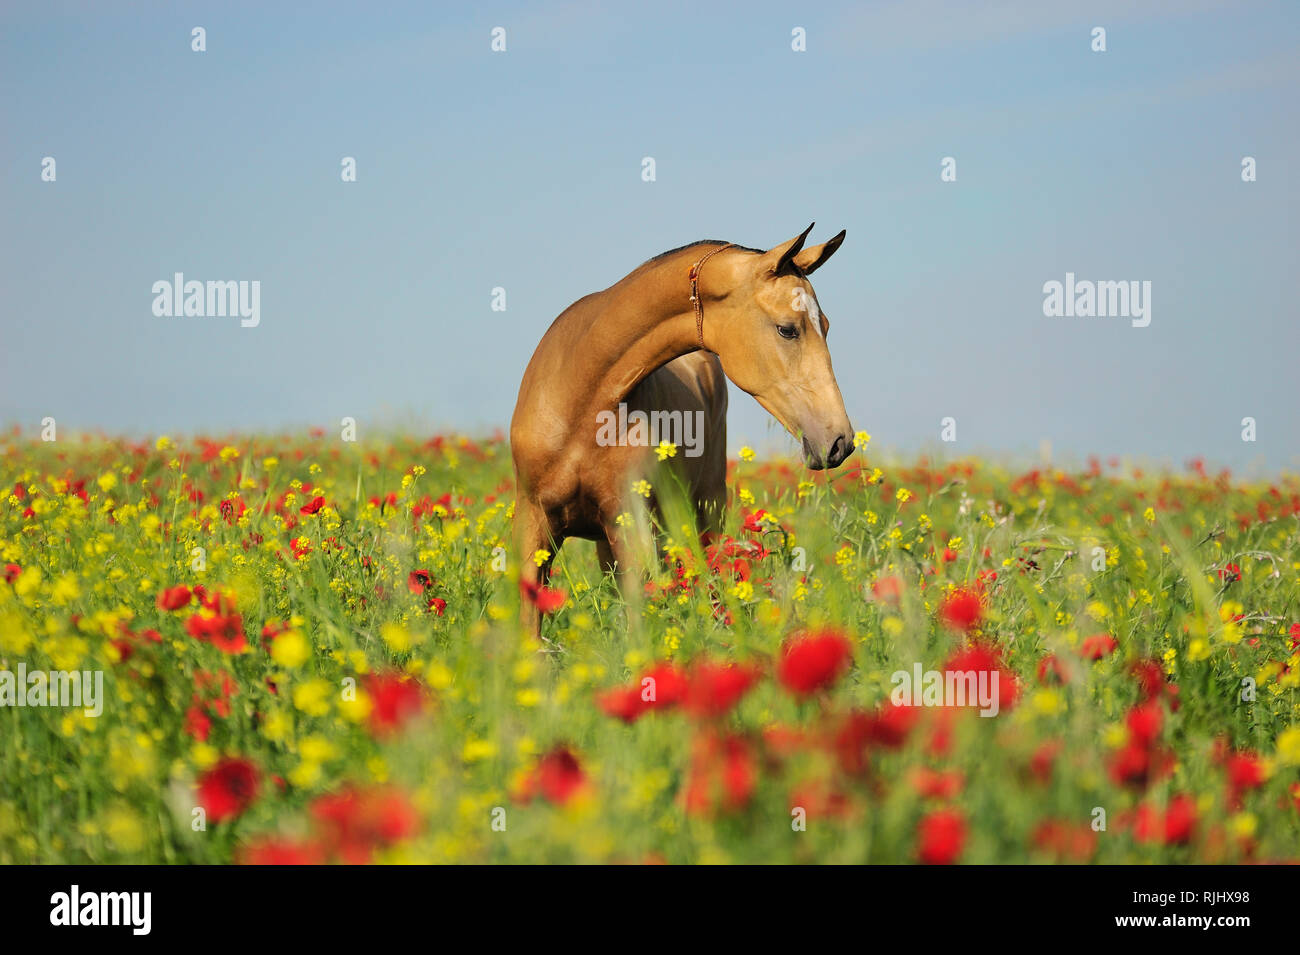 Golden akhal-teke horse with alaja decoration standing on a field full of red and yellow flowers Stock Photo